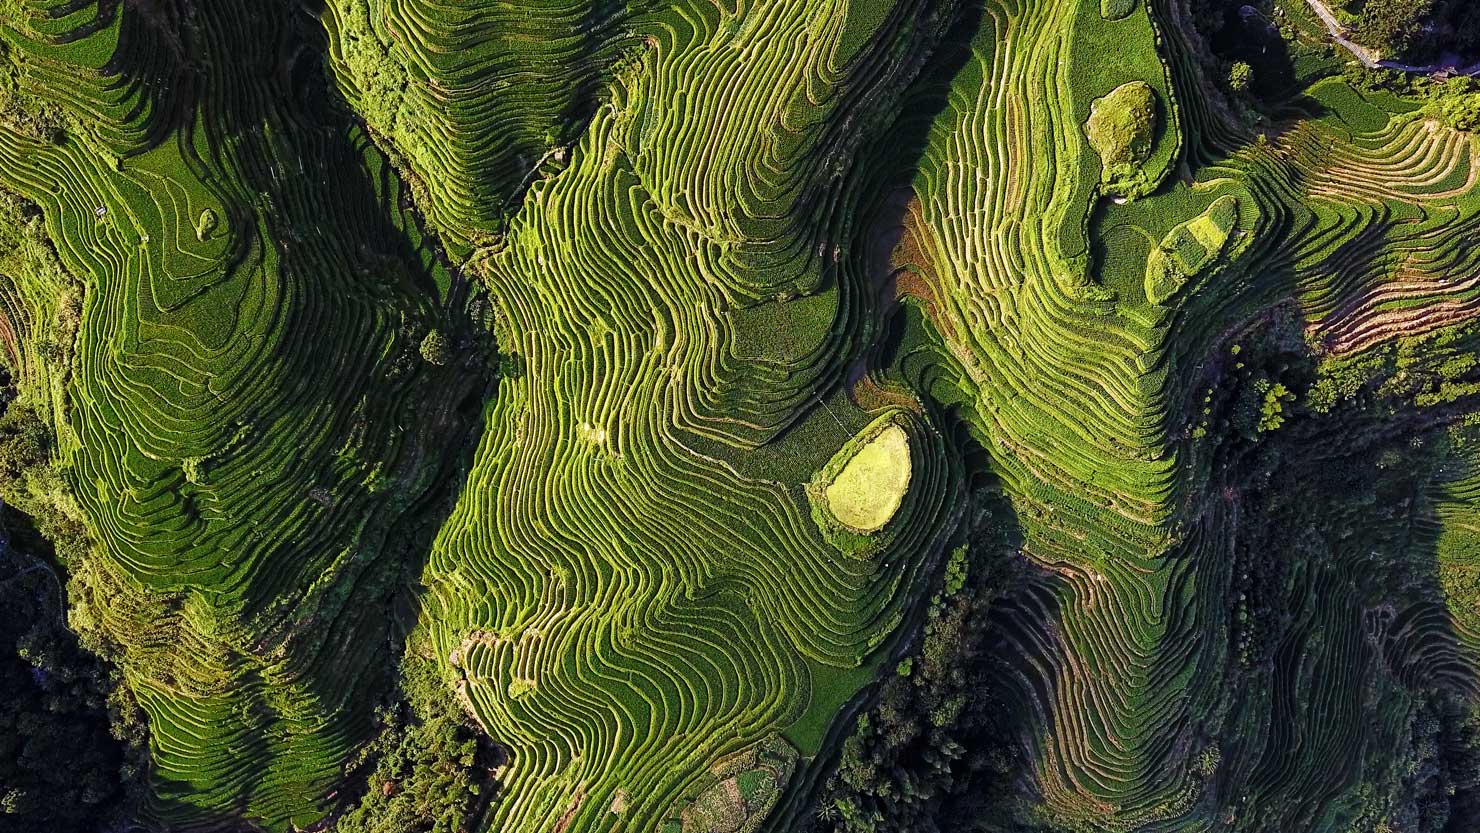 LongJi Long Ji Rice Terrace Above China Fields Paddy Drone Aerial Photography Licensed Operator FAA Part 107 CAA PfCO Commercial Paul Reiffer Professional